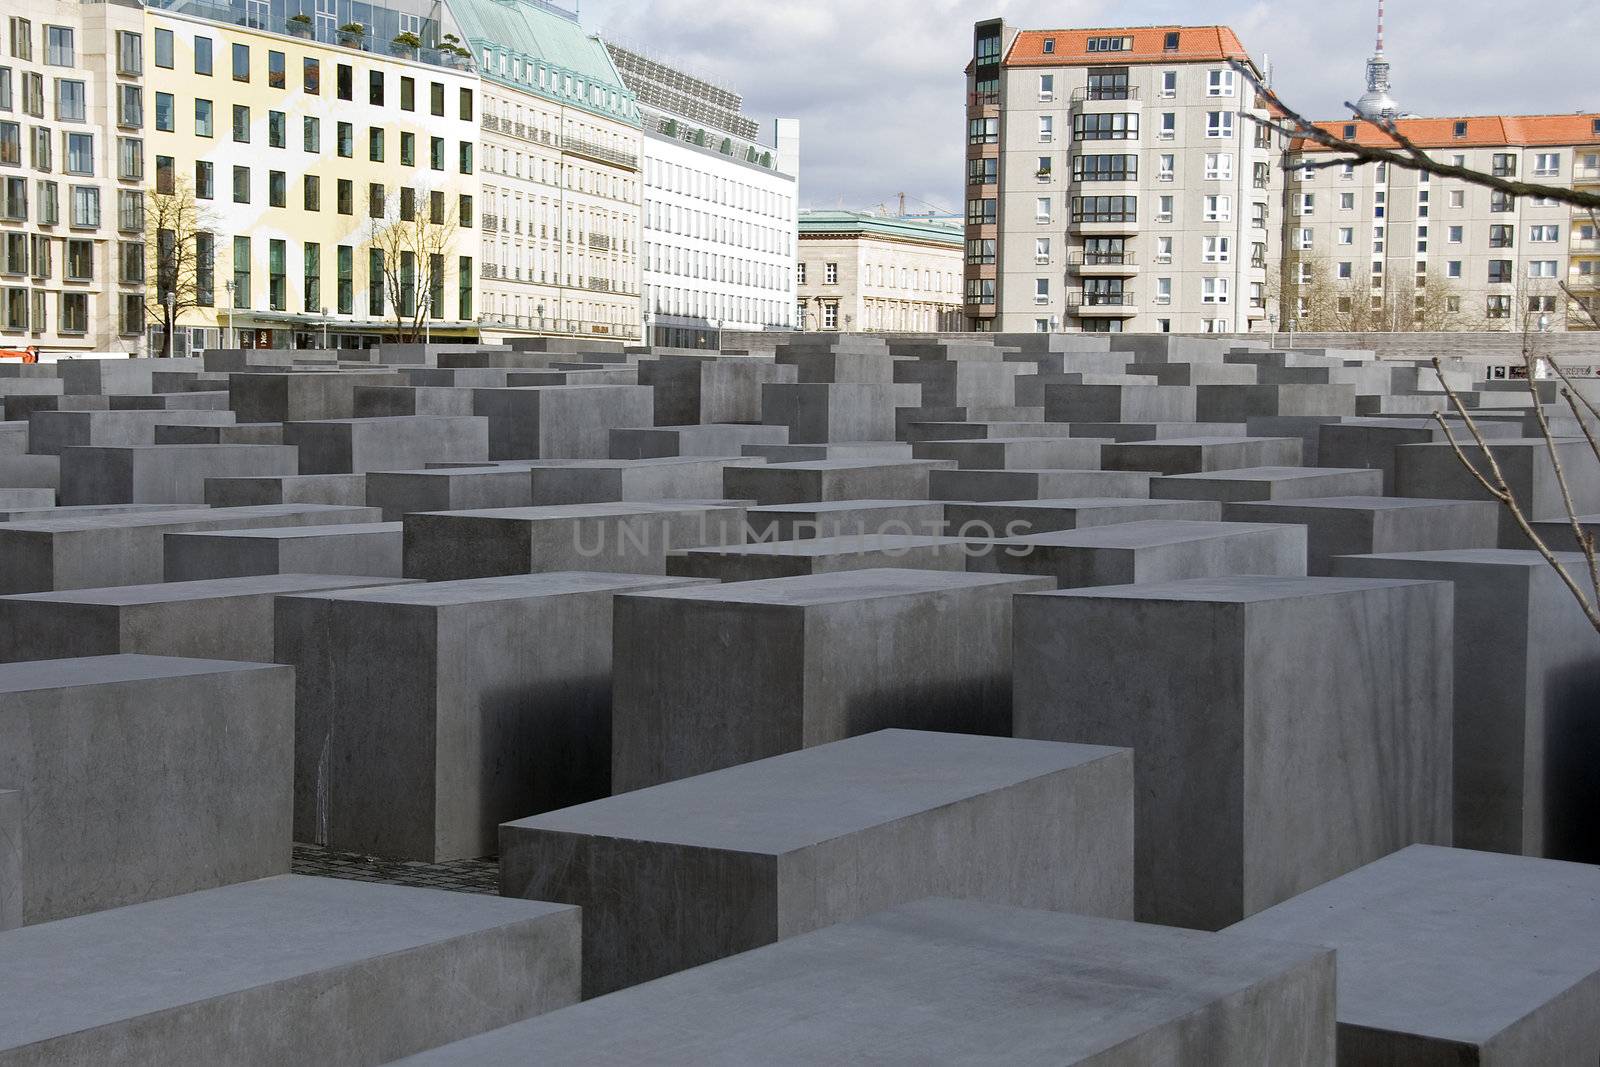 The Holocaust memorial monument in Berlin Germany